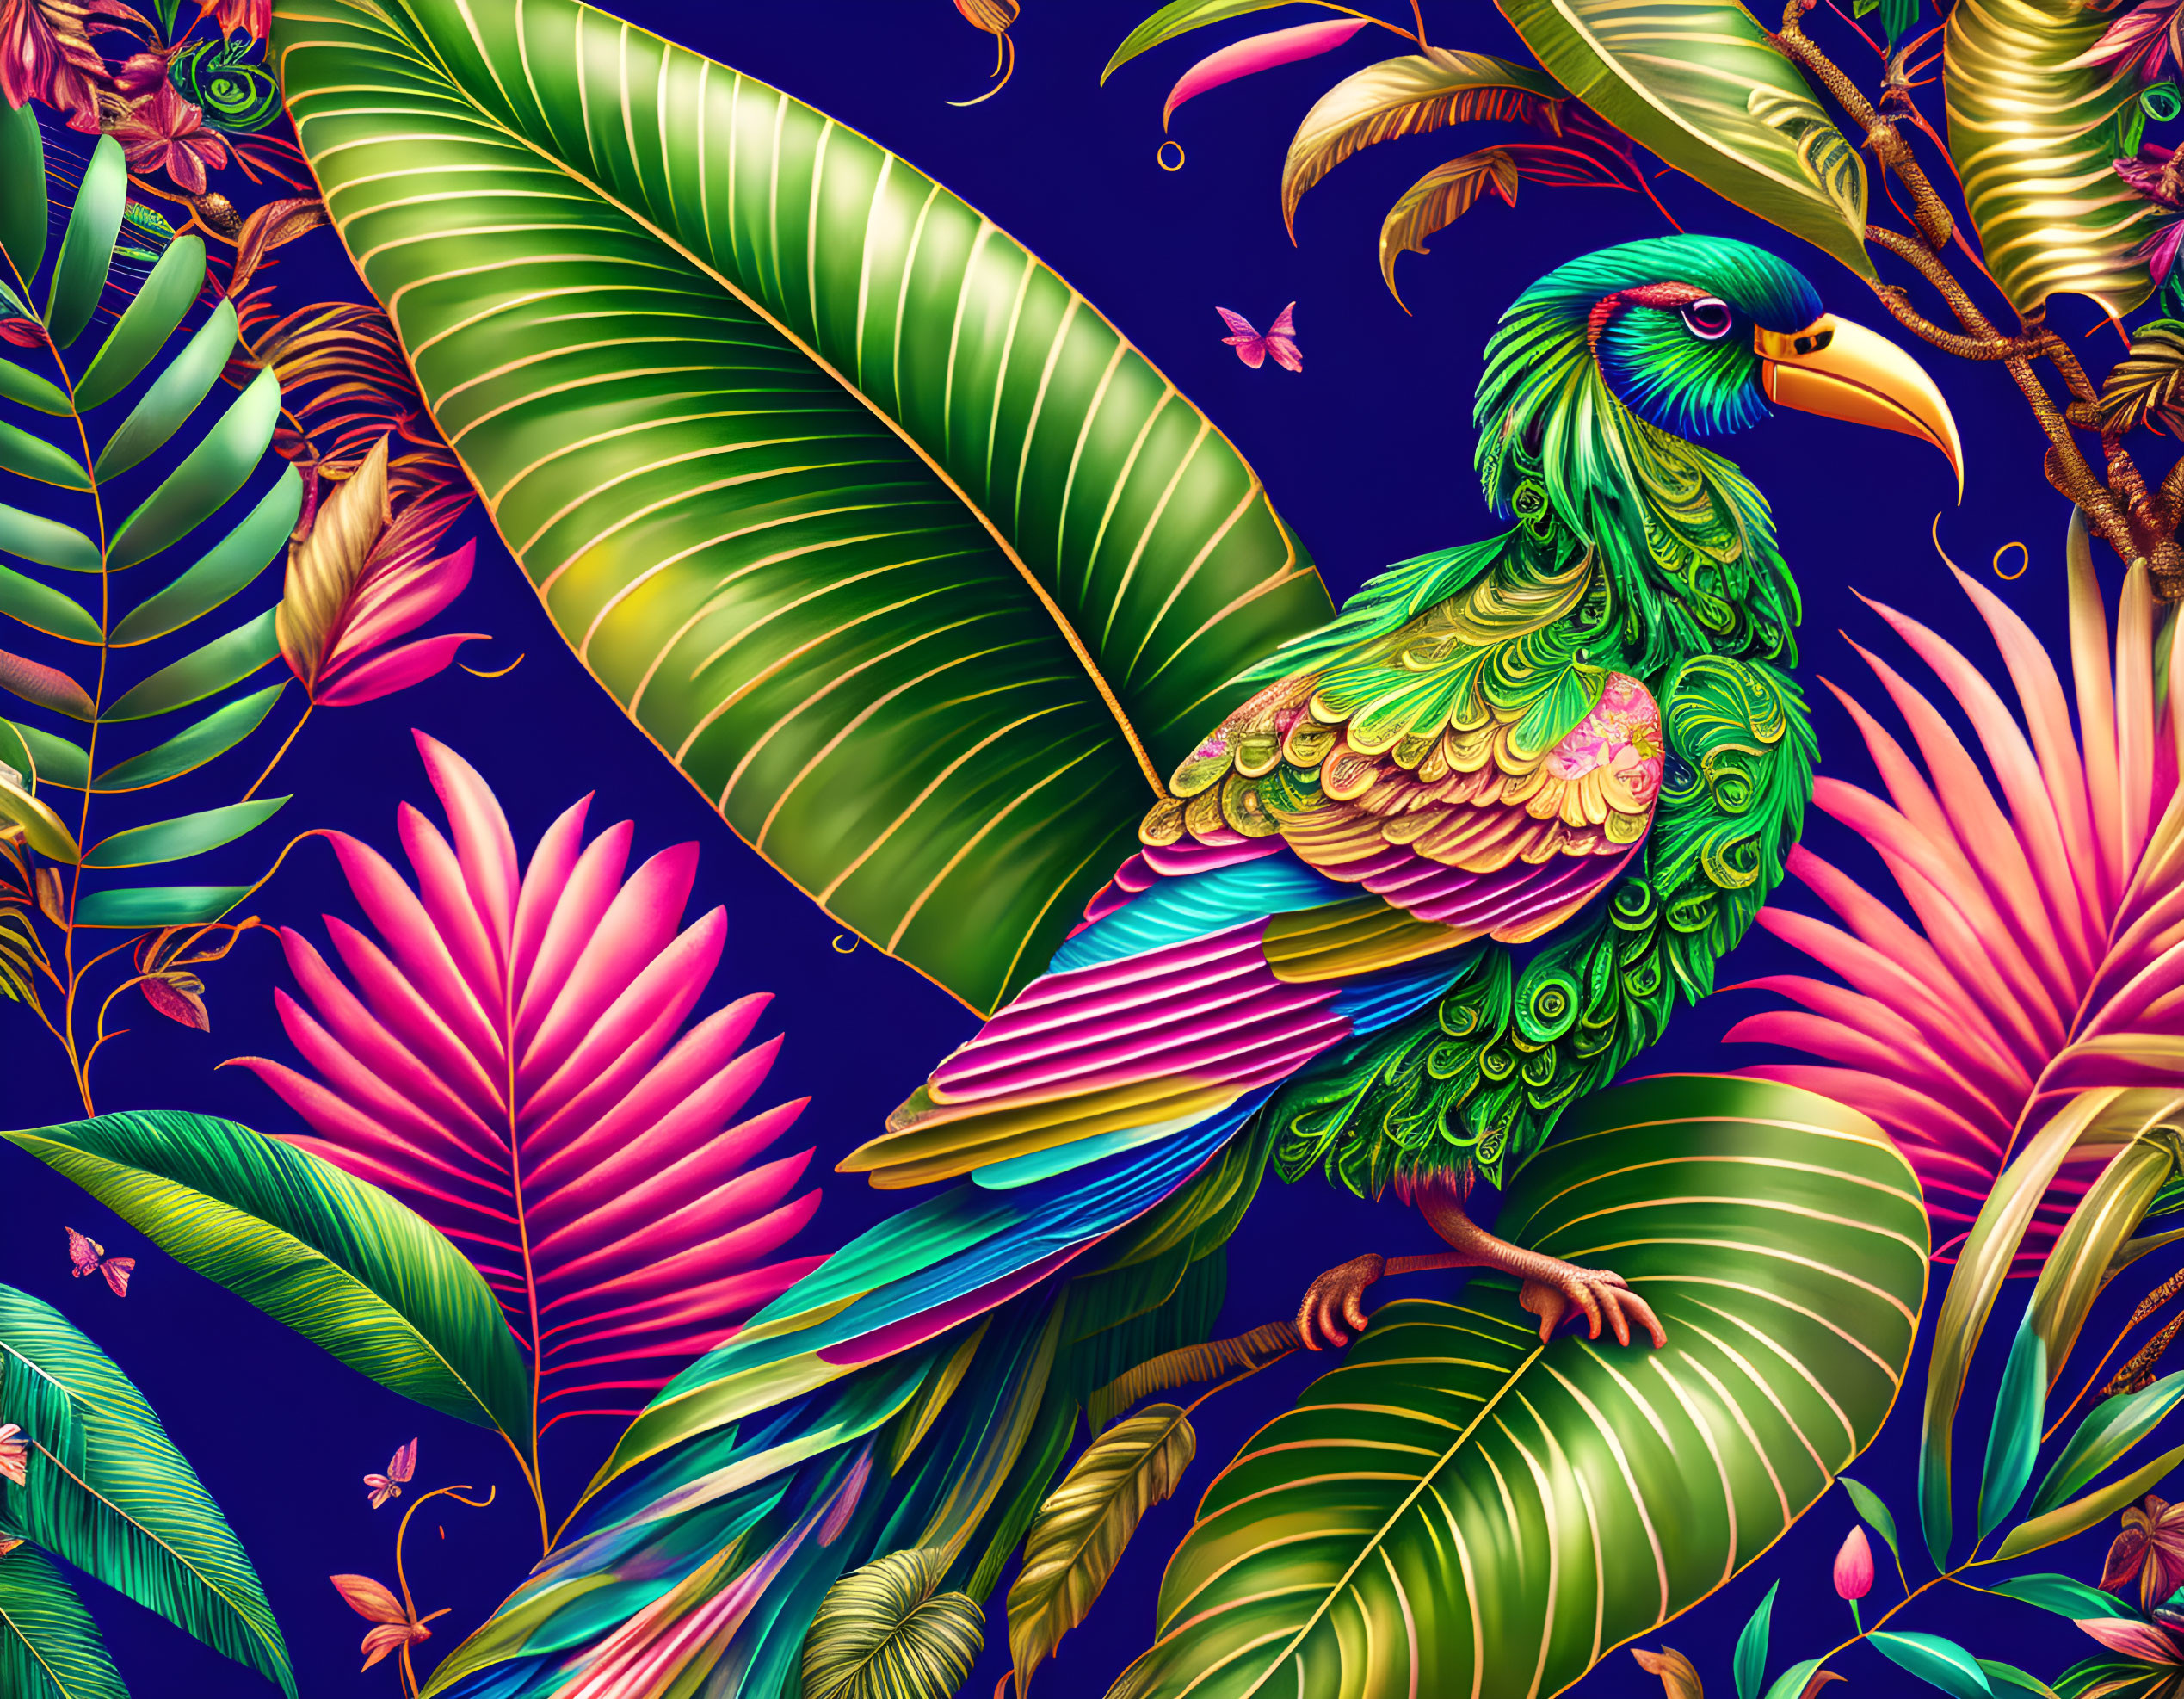 Colorful Parrot in Tropical Foliage with Butterfly: Vibrant Illustration